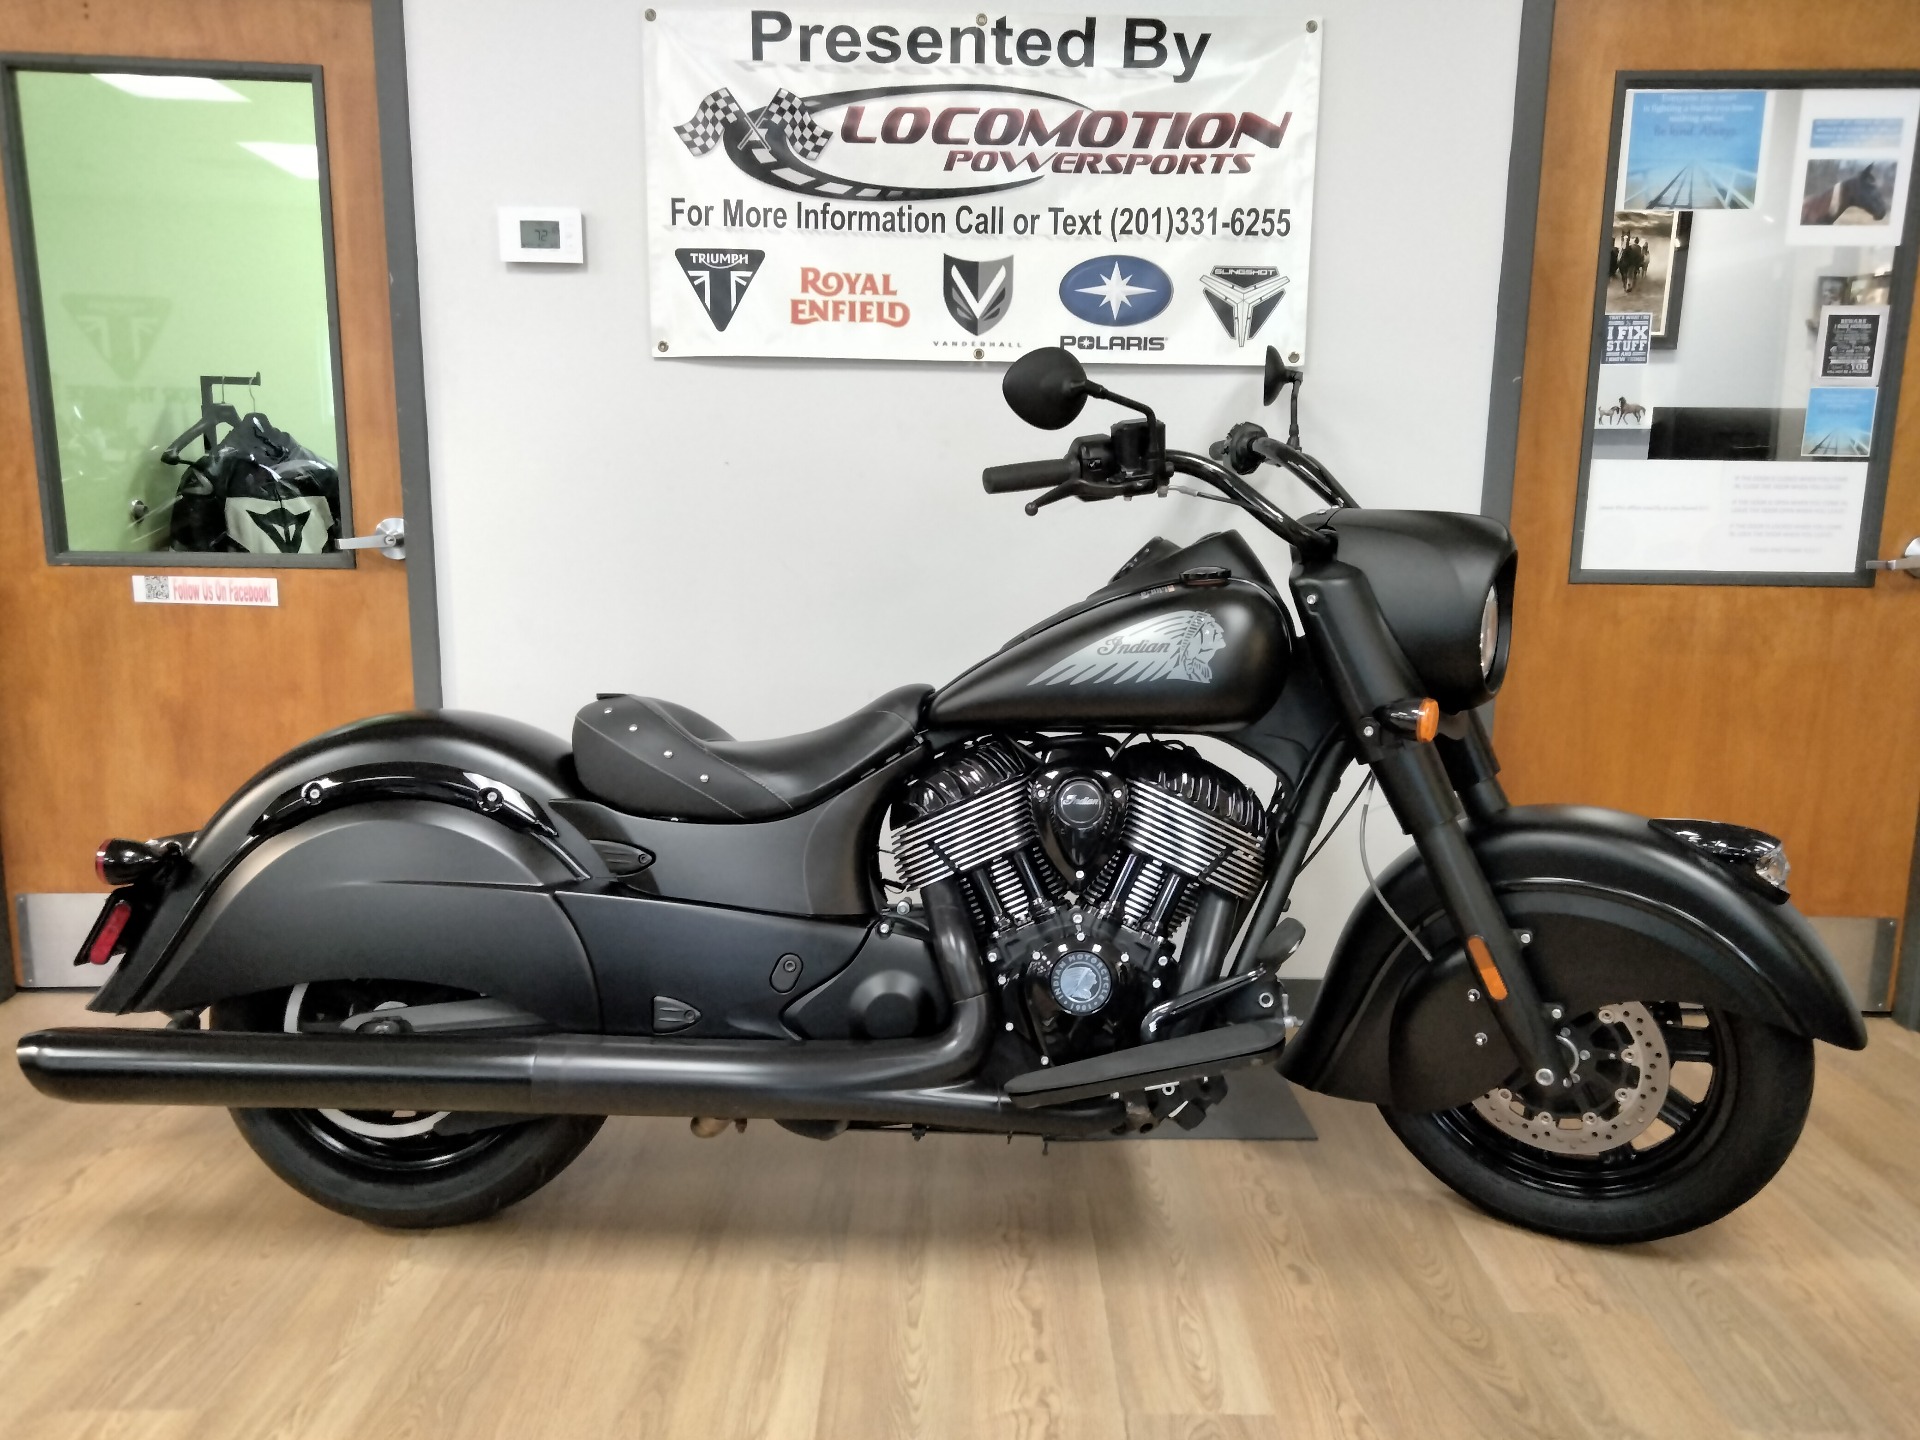 2020 Indian Motorcycle Chief® Dark Horse® in Mahwah, New Jersey - Photo 1